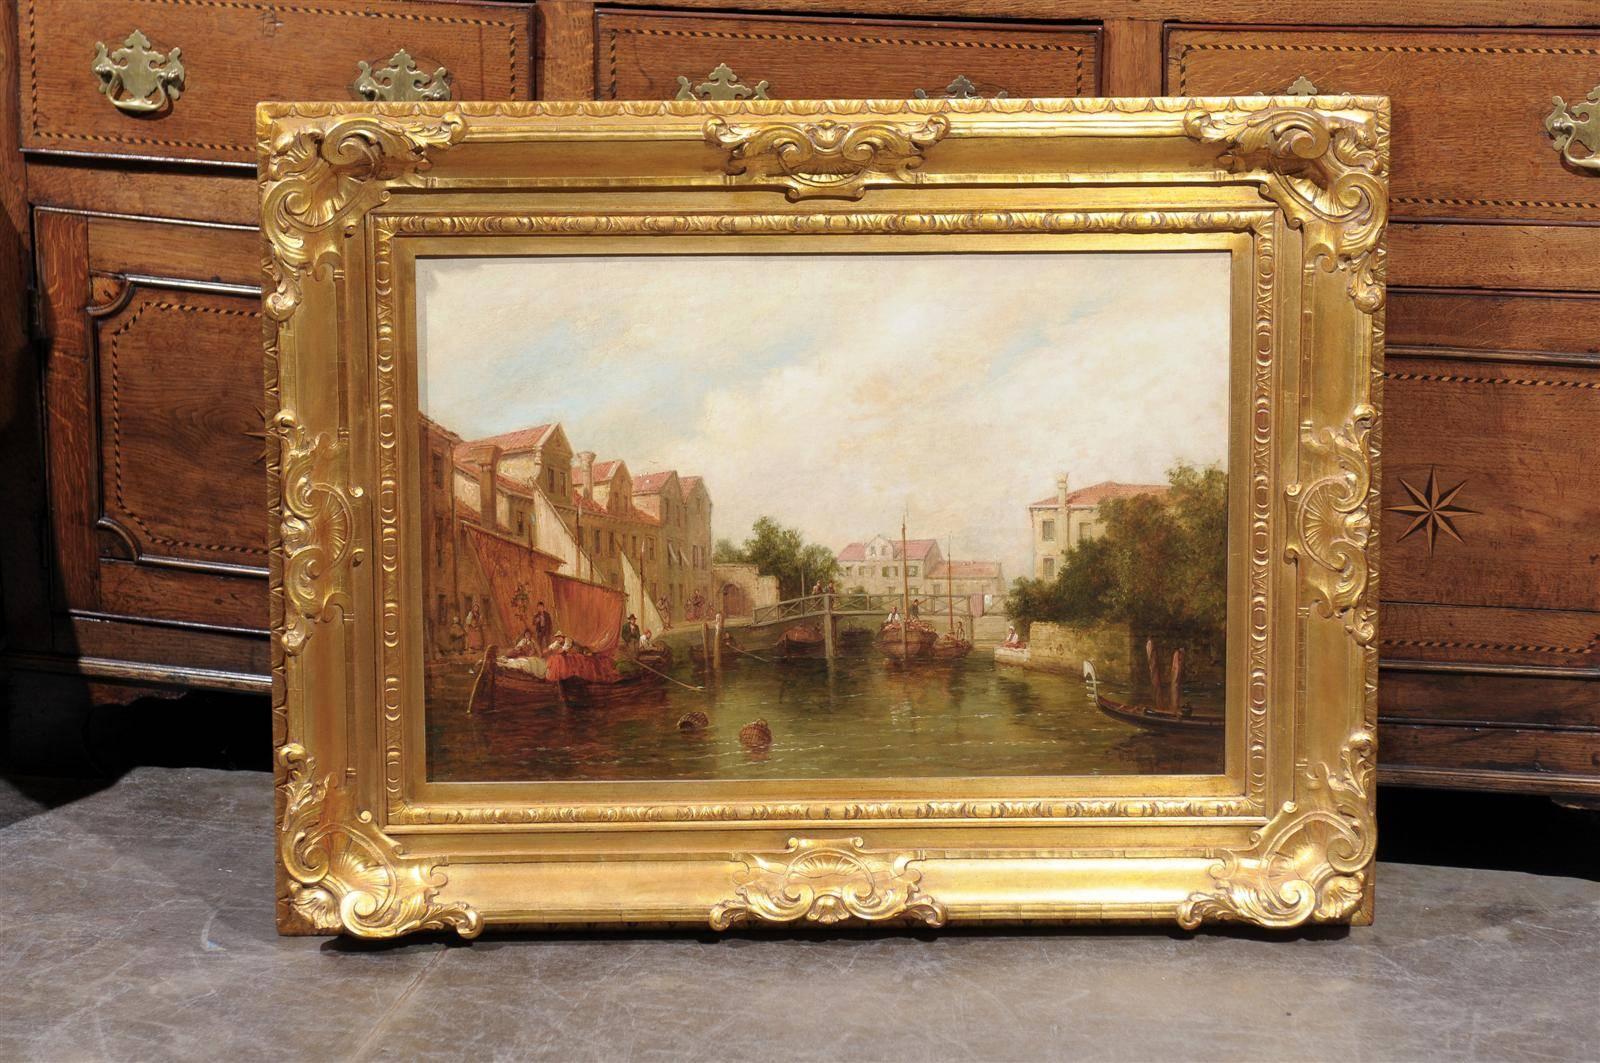 This oil on canvas painting from the late 19th century depicts a serene scene. In the center of the composition sits a busy canal, with a wooden bridge in the background. Along the canal are pedestrians, including a mother and her two children,